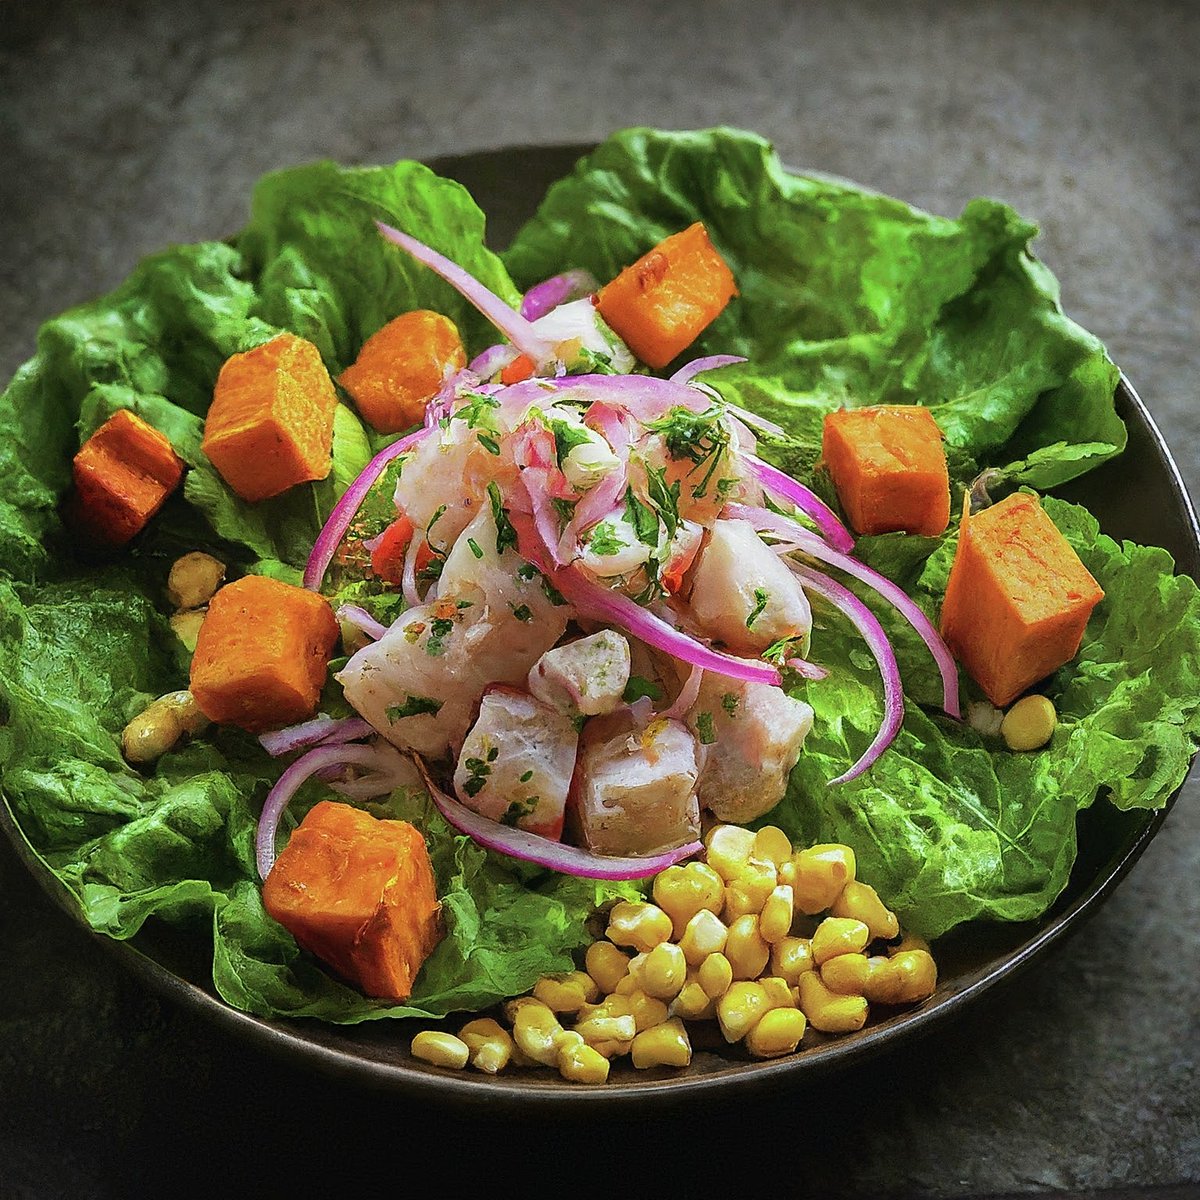 🌿🍋 Peruvian Ceviche:

- Marinate diced fresh fish (such as sea bass or sole) in lime juice with onions, cilantro, and chili peppers until the fish is 'cooked' by the acid.

- Serve with sweet potatoes, corn, and lettuce.

#easydinner #easylunch #recipeoftheday #dailytrophy